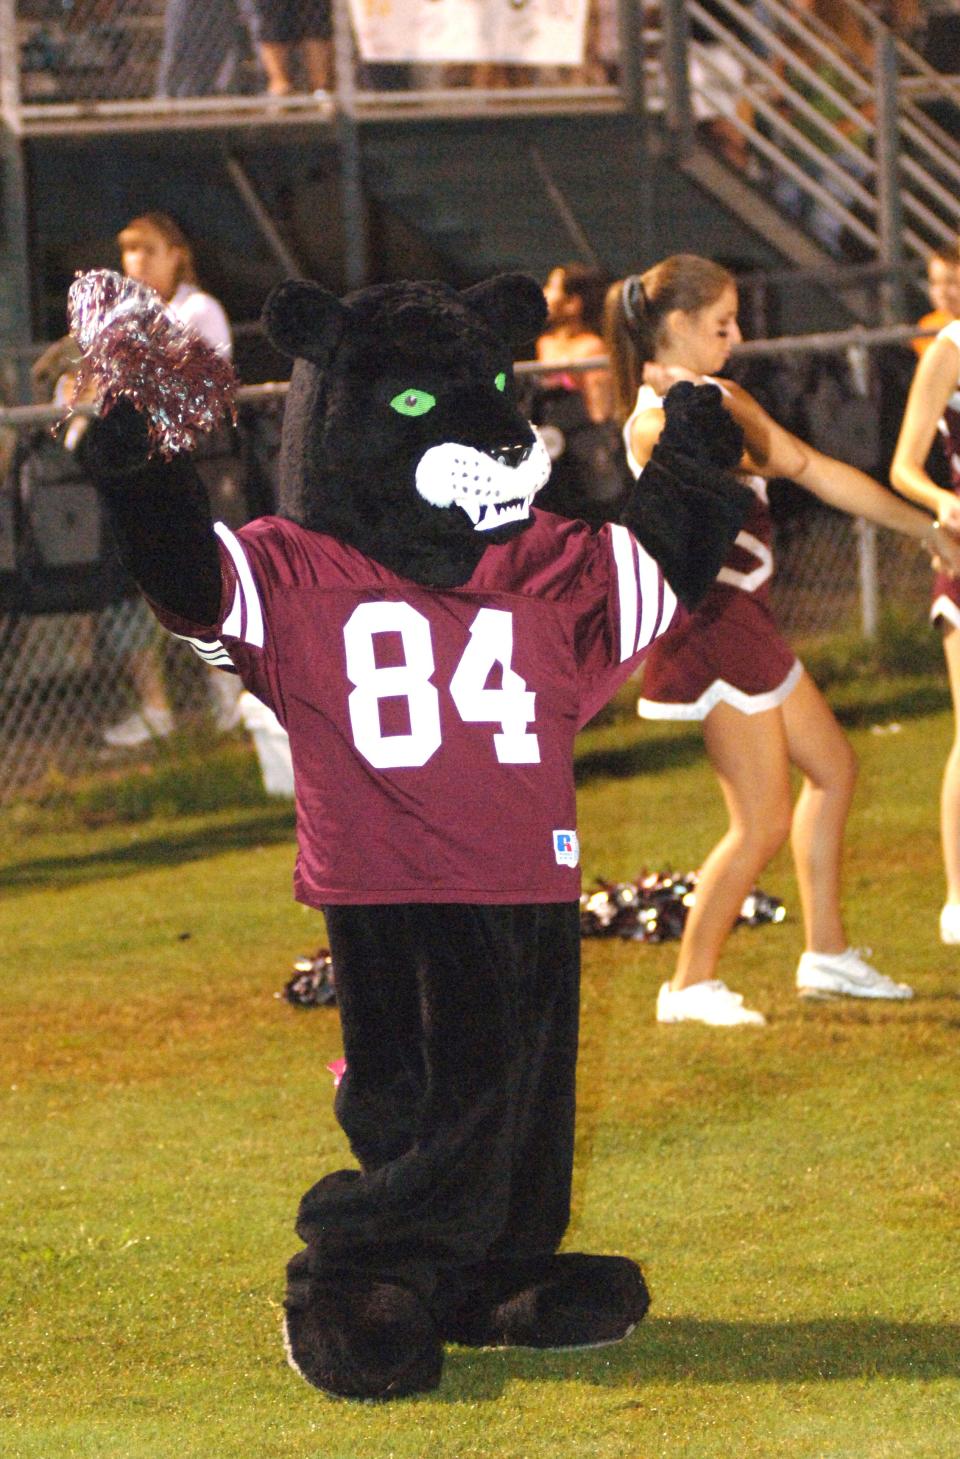 Lakeside High School's panther mascot joins in with the cheerleader during a football in this photo from 2006. The panther is one of Georgia's most popular high school mascots.